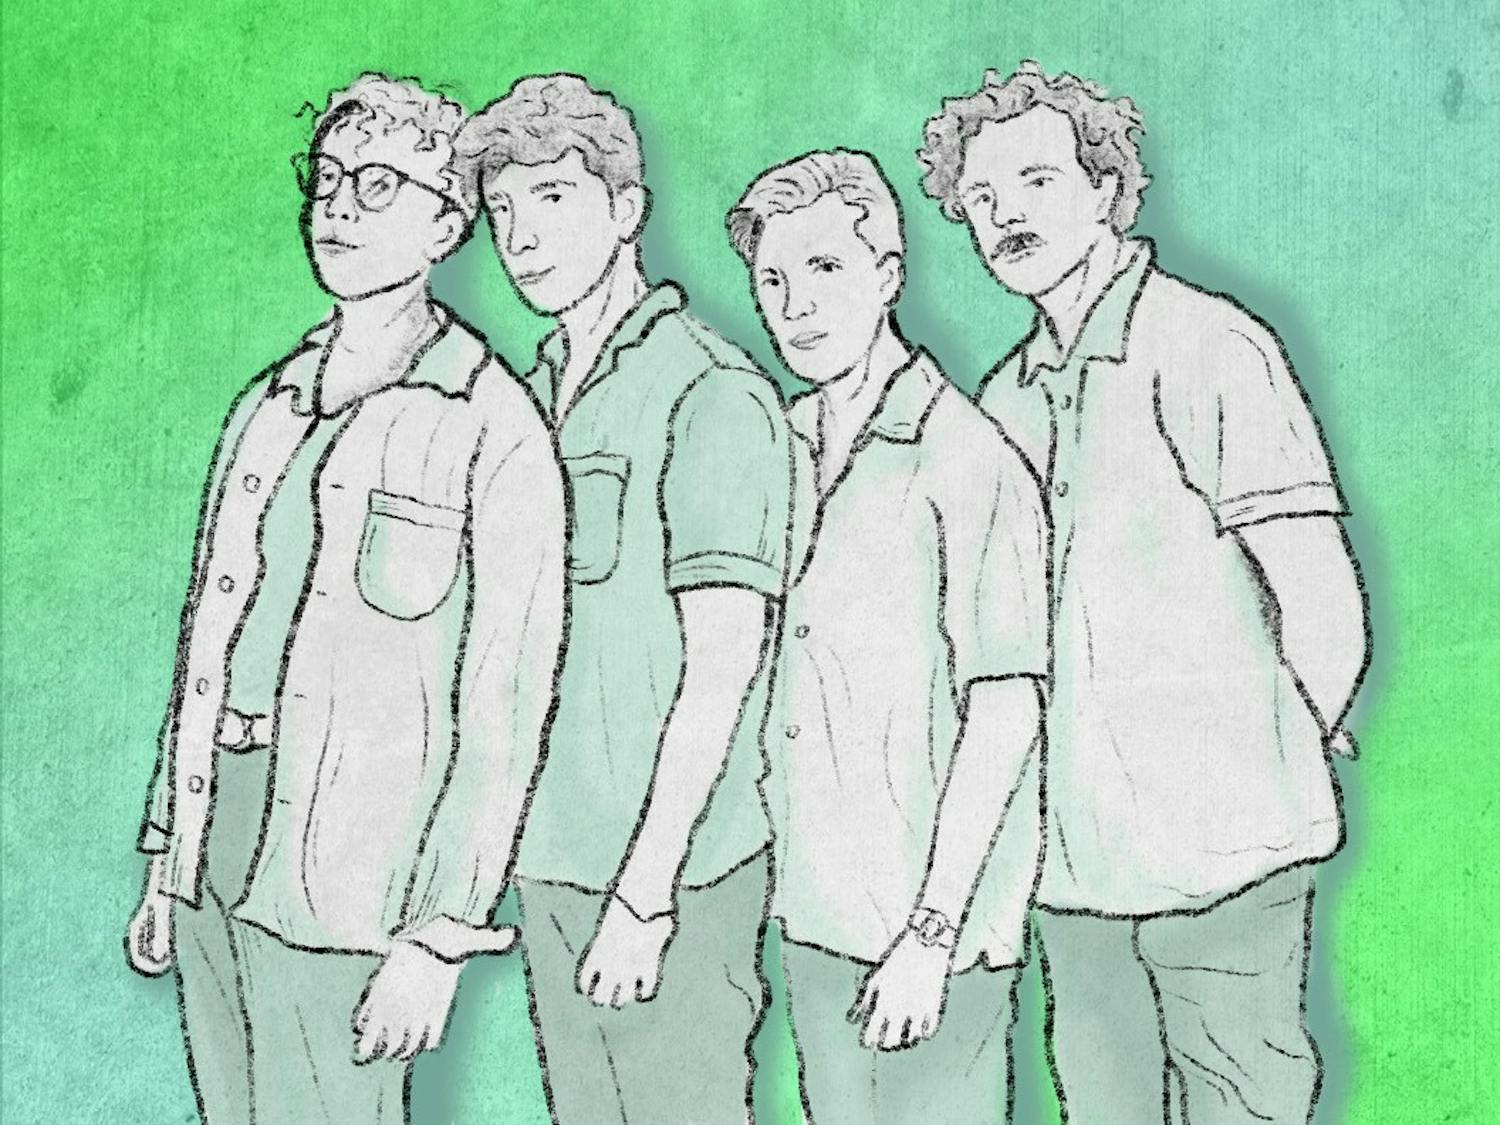 A sketch of the Florida-based band Driveaway.